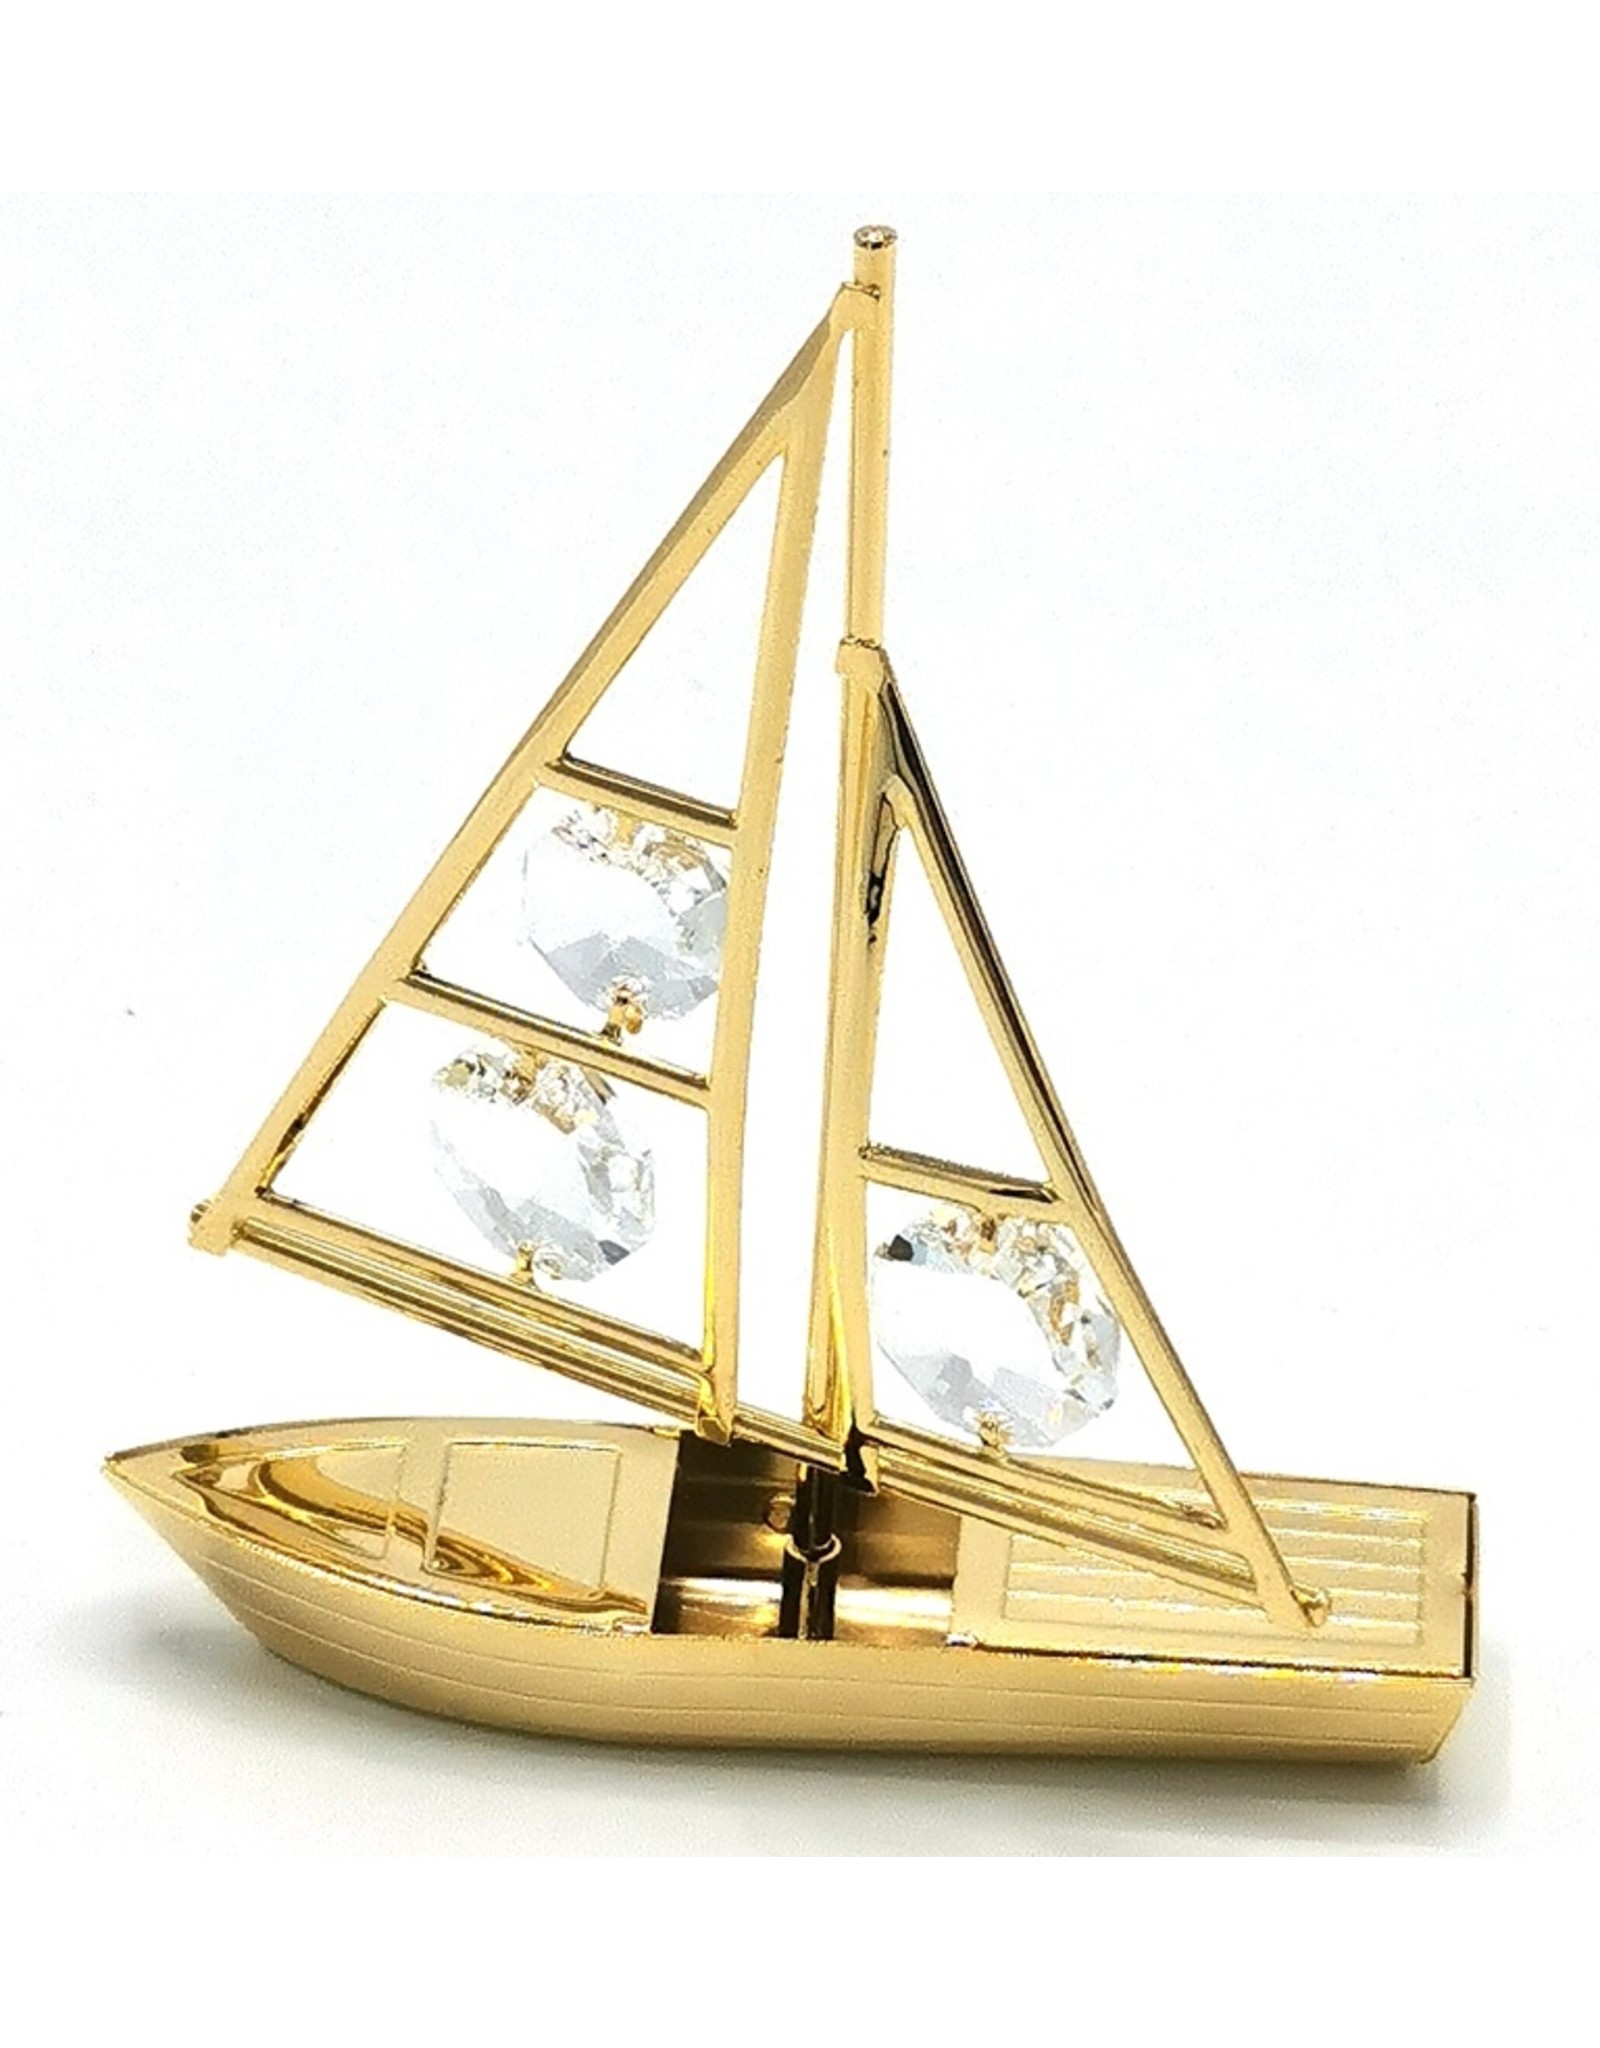 Crystal Temptations Miscellaneous - Miniature Boat. Gold-plated and with Swarovski